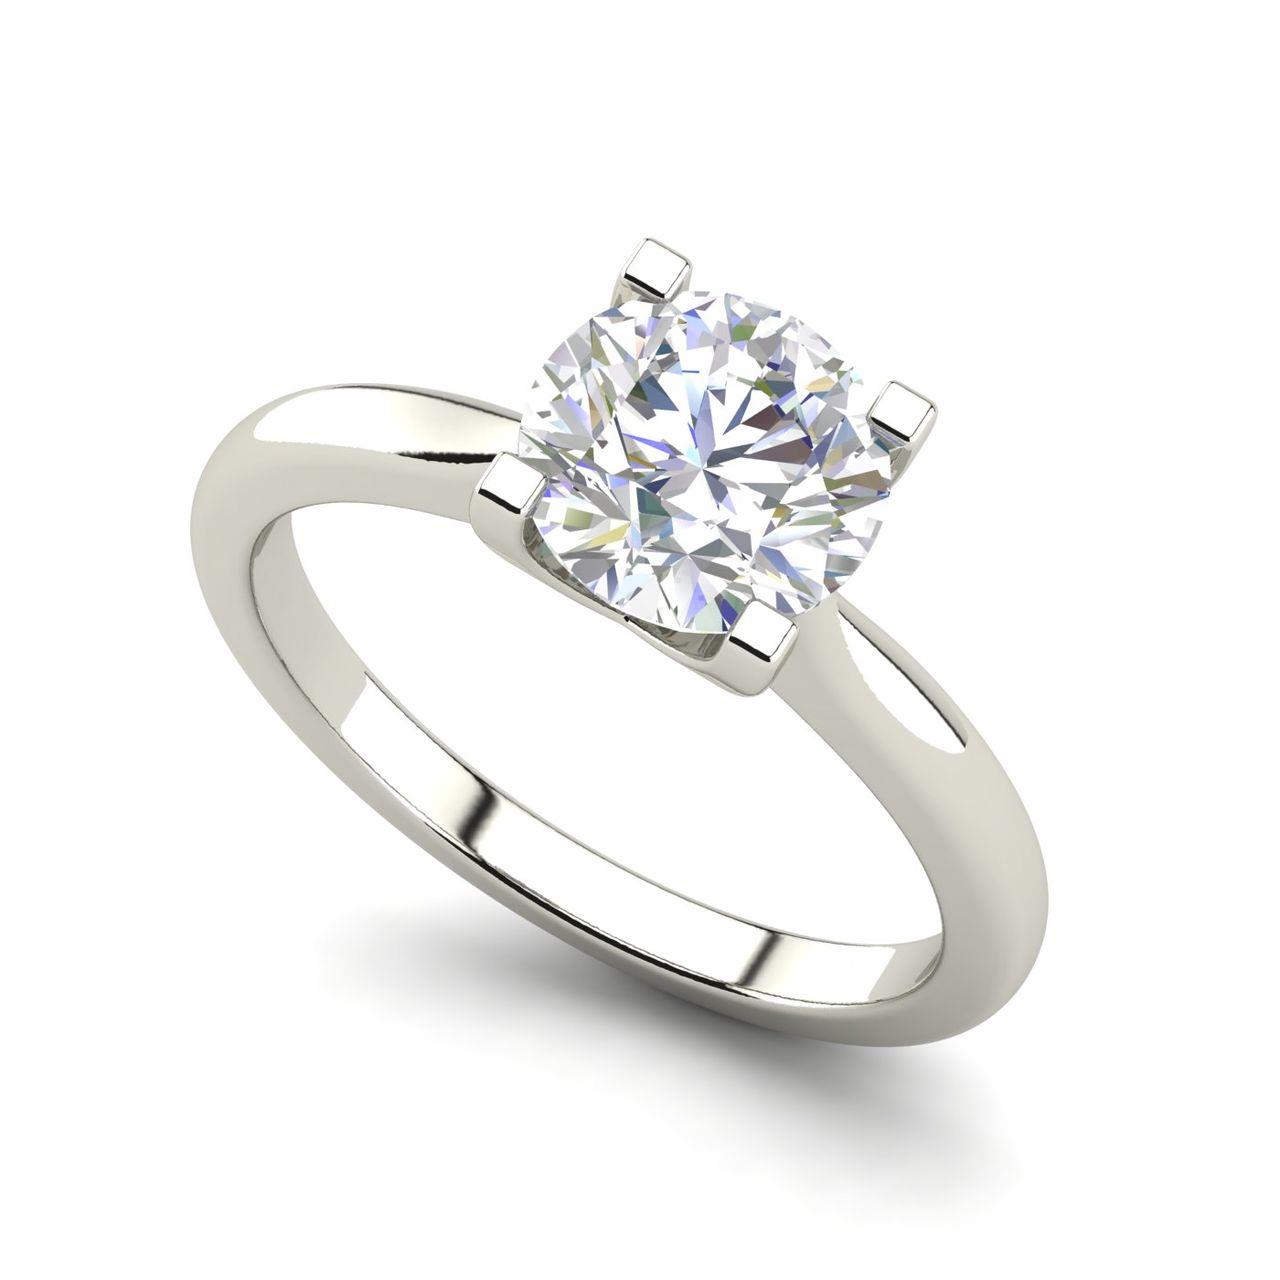 4 claw Solitaire 1 Carat Round Cut Diamond Engagement Ring